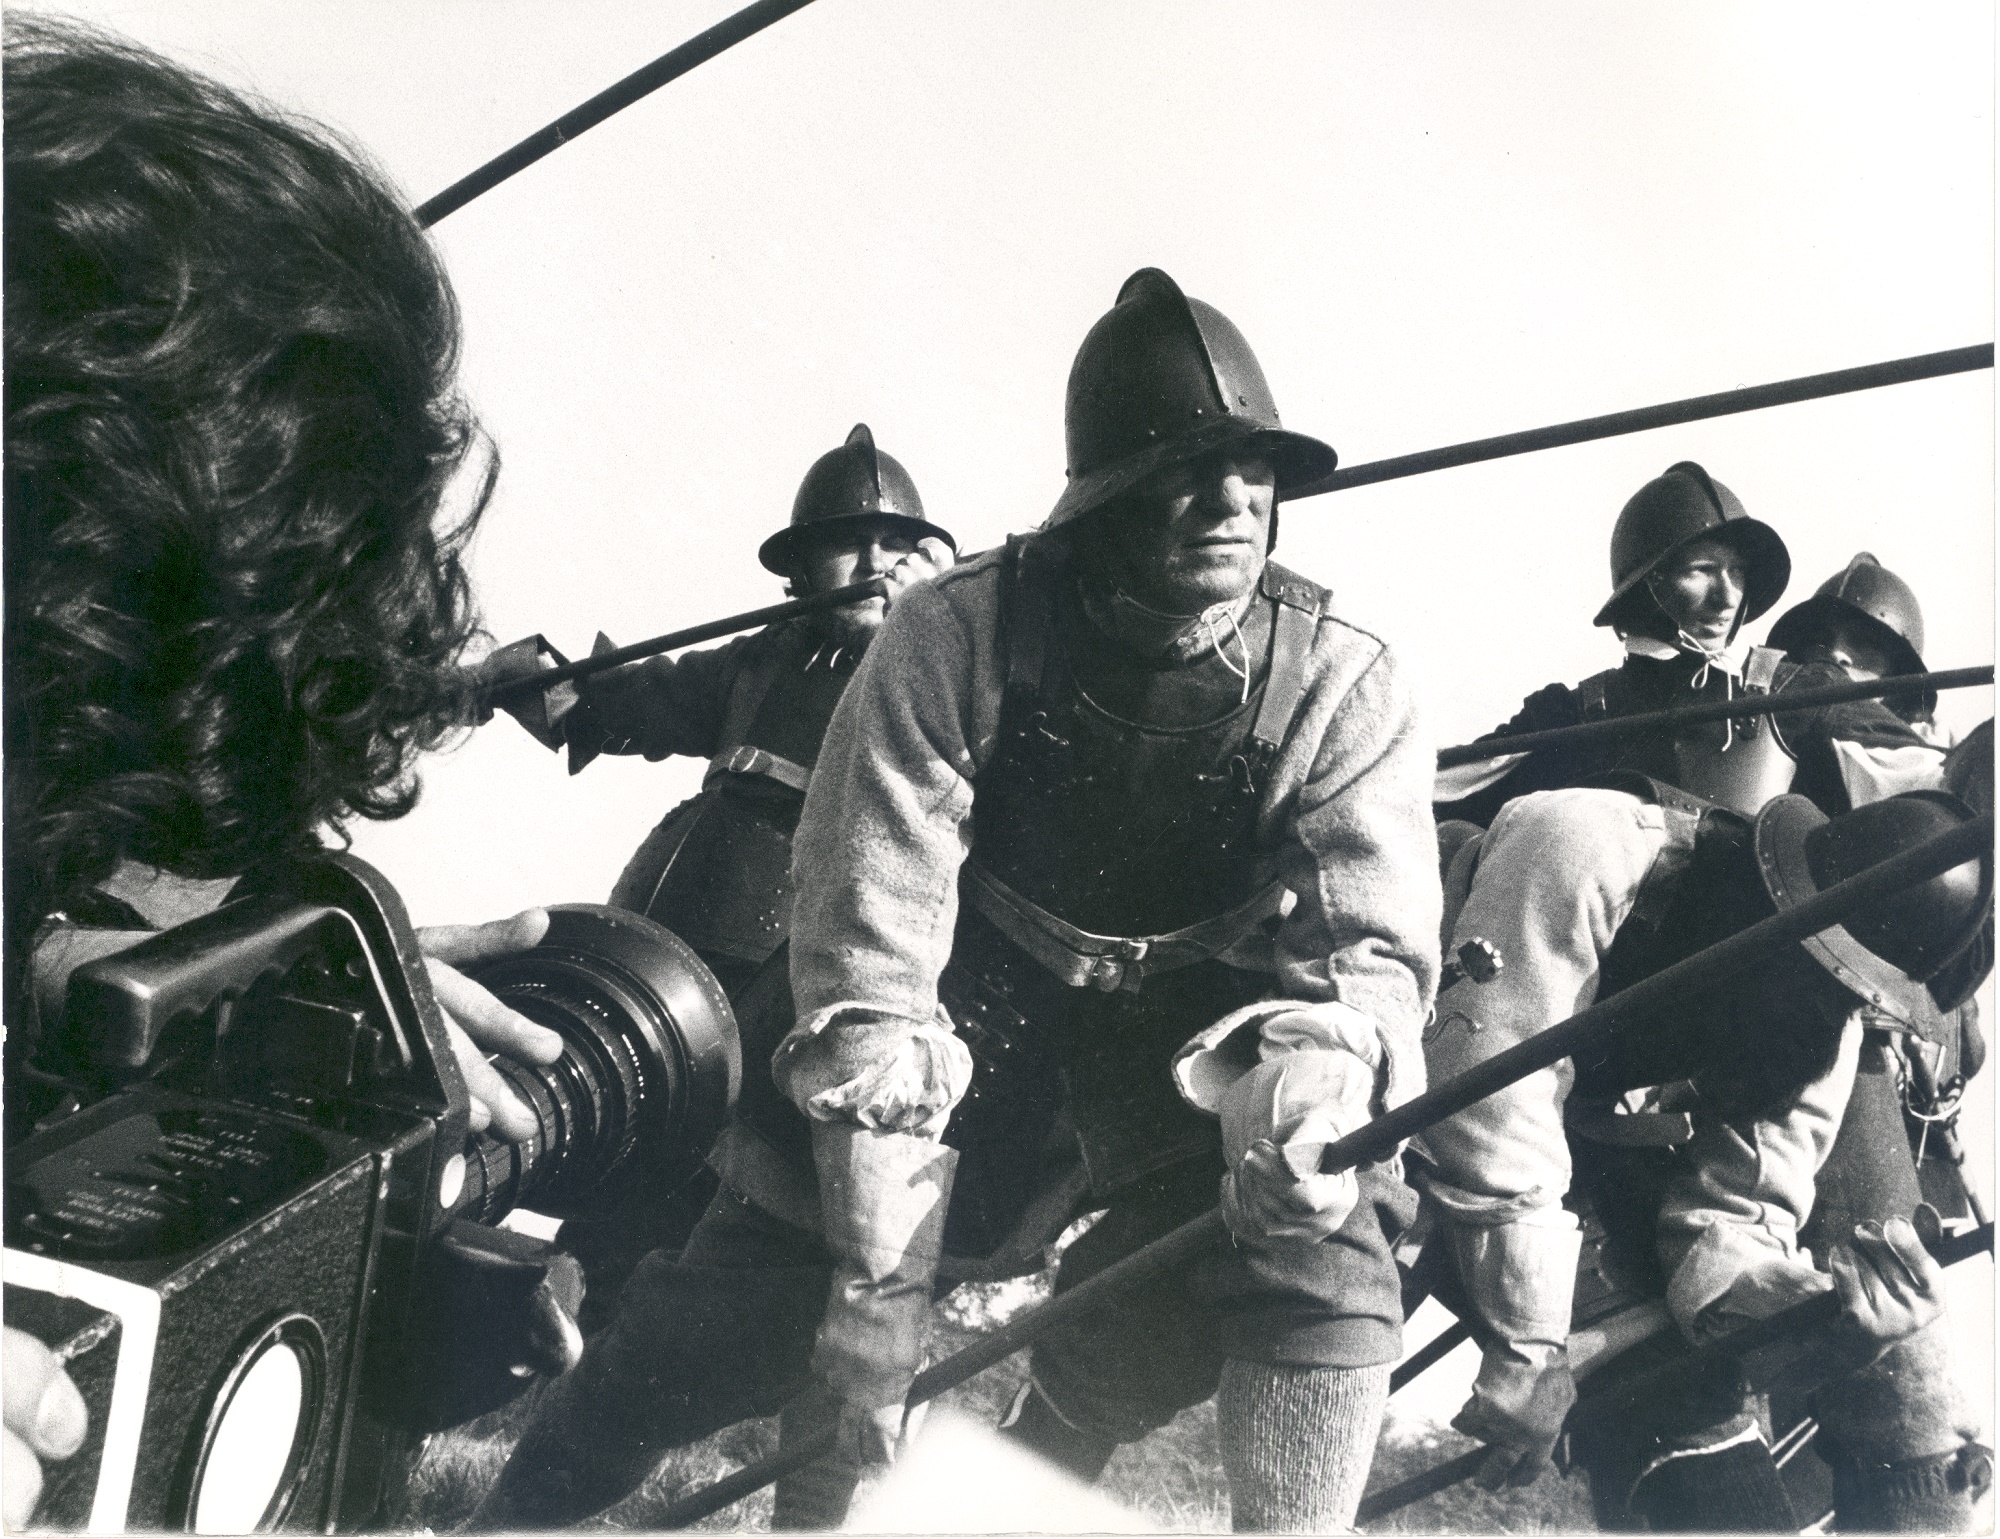 Black and white photograph still of the filming of a battle scene in the film - Winstanley (1975) - showing a group of men fighting the character Tom Haydon, played by Terry Higgins.